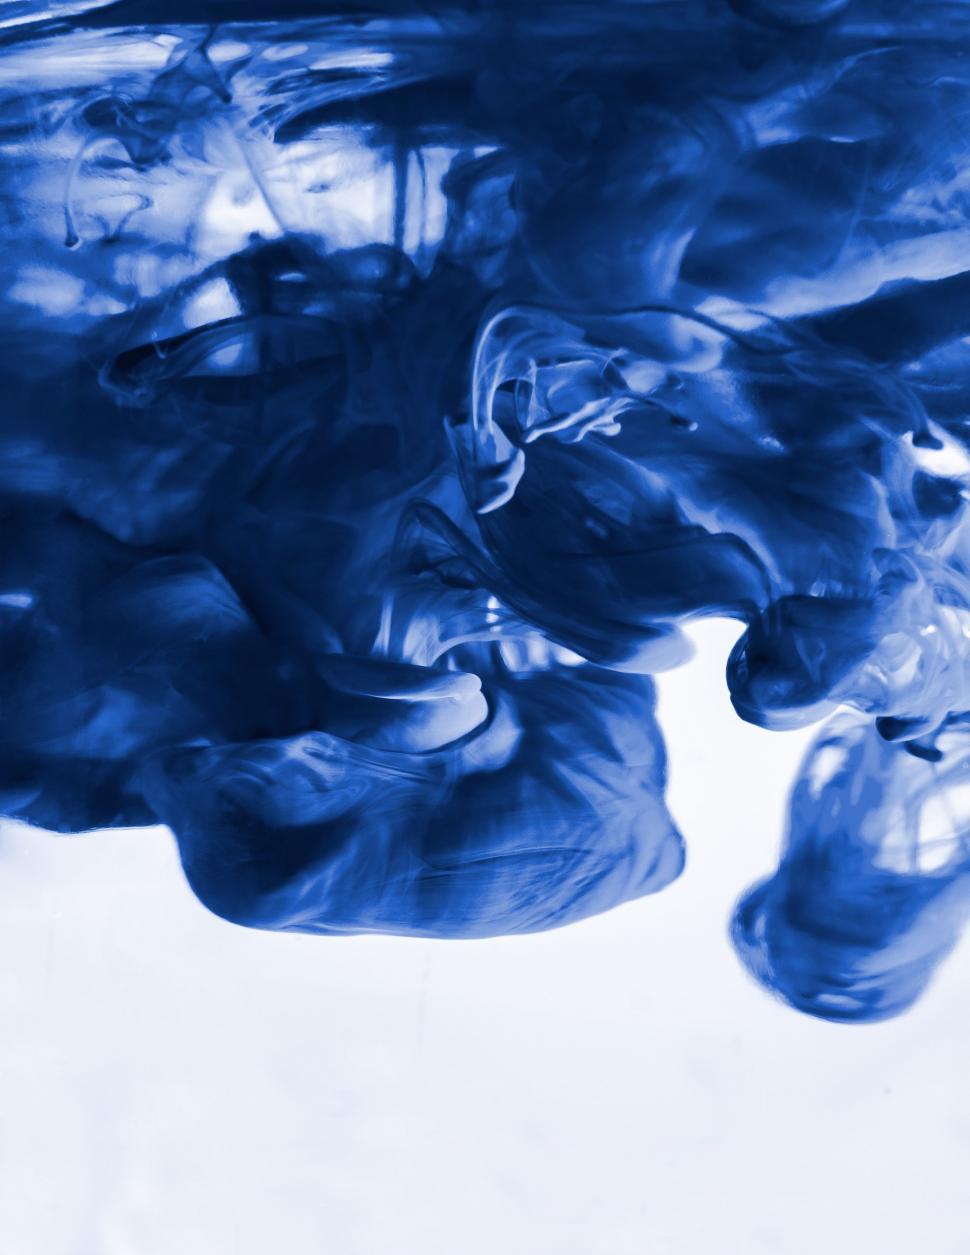 Free Image of Blue Substance Floating in Water on White Surface 